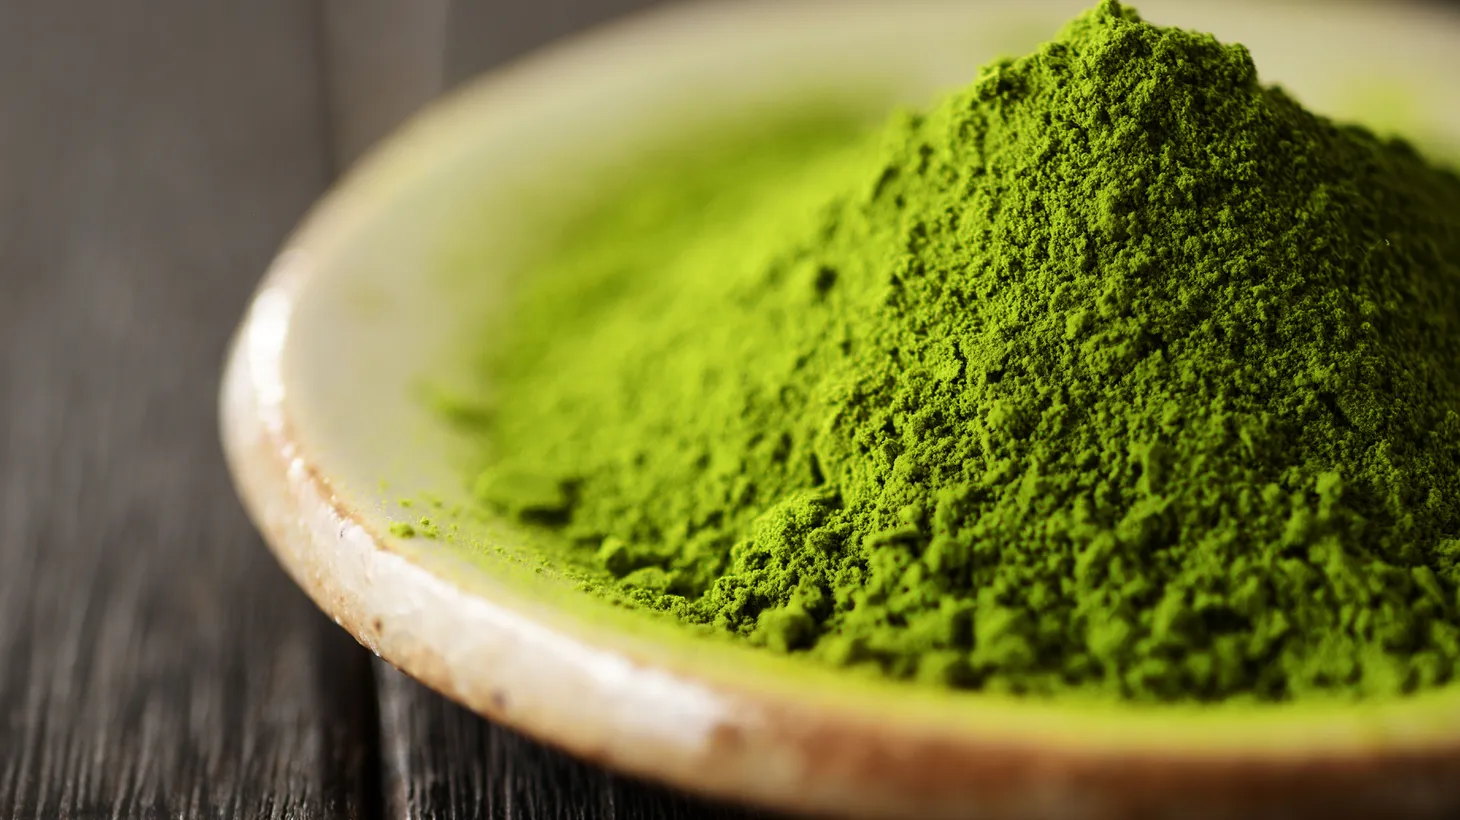 Matcha is made from shade-grown tea leaves that have been deveined and stemmed, dried, and then ground into a vibrant- colored powder.